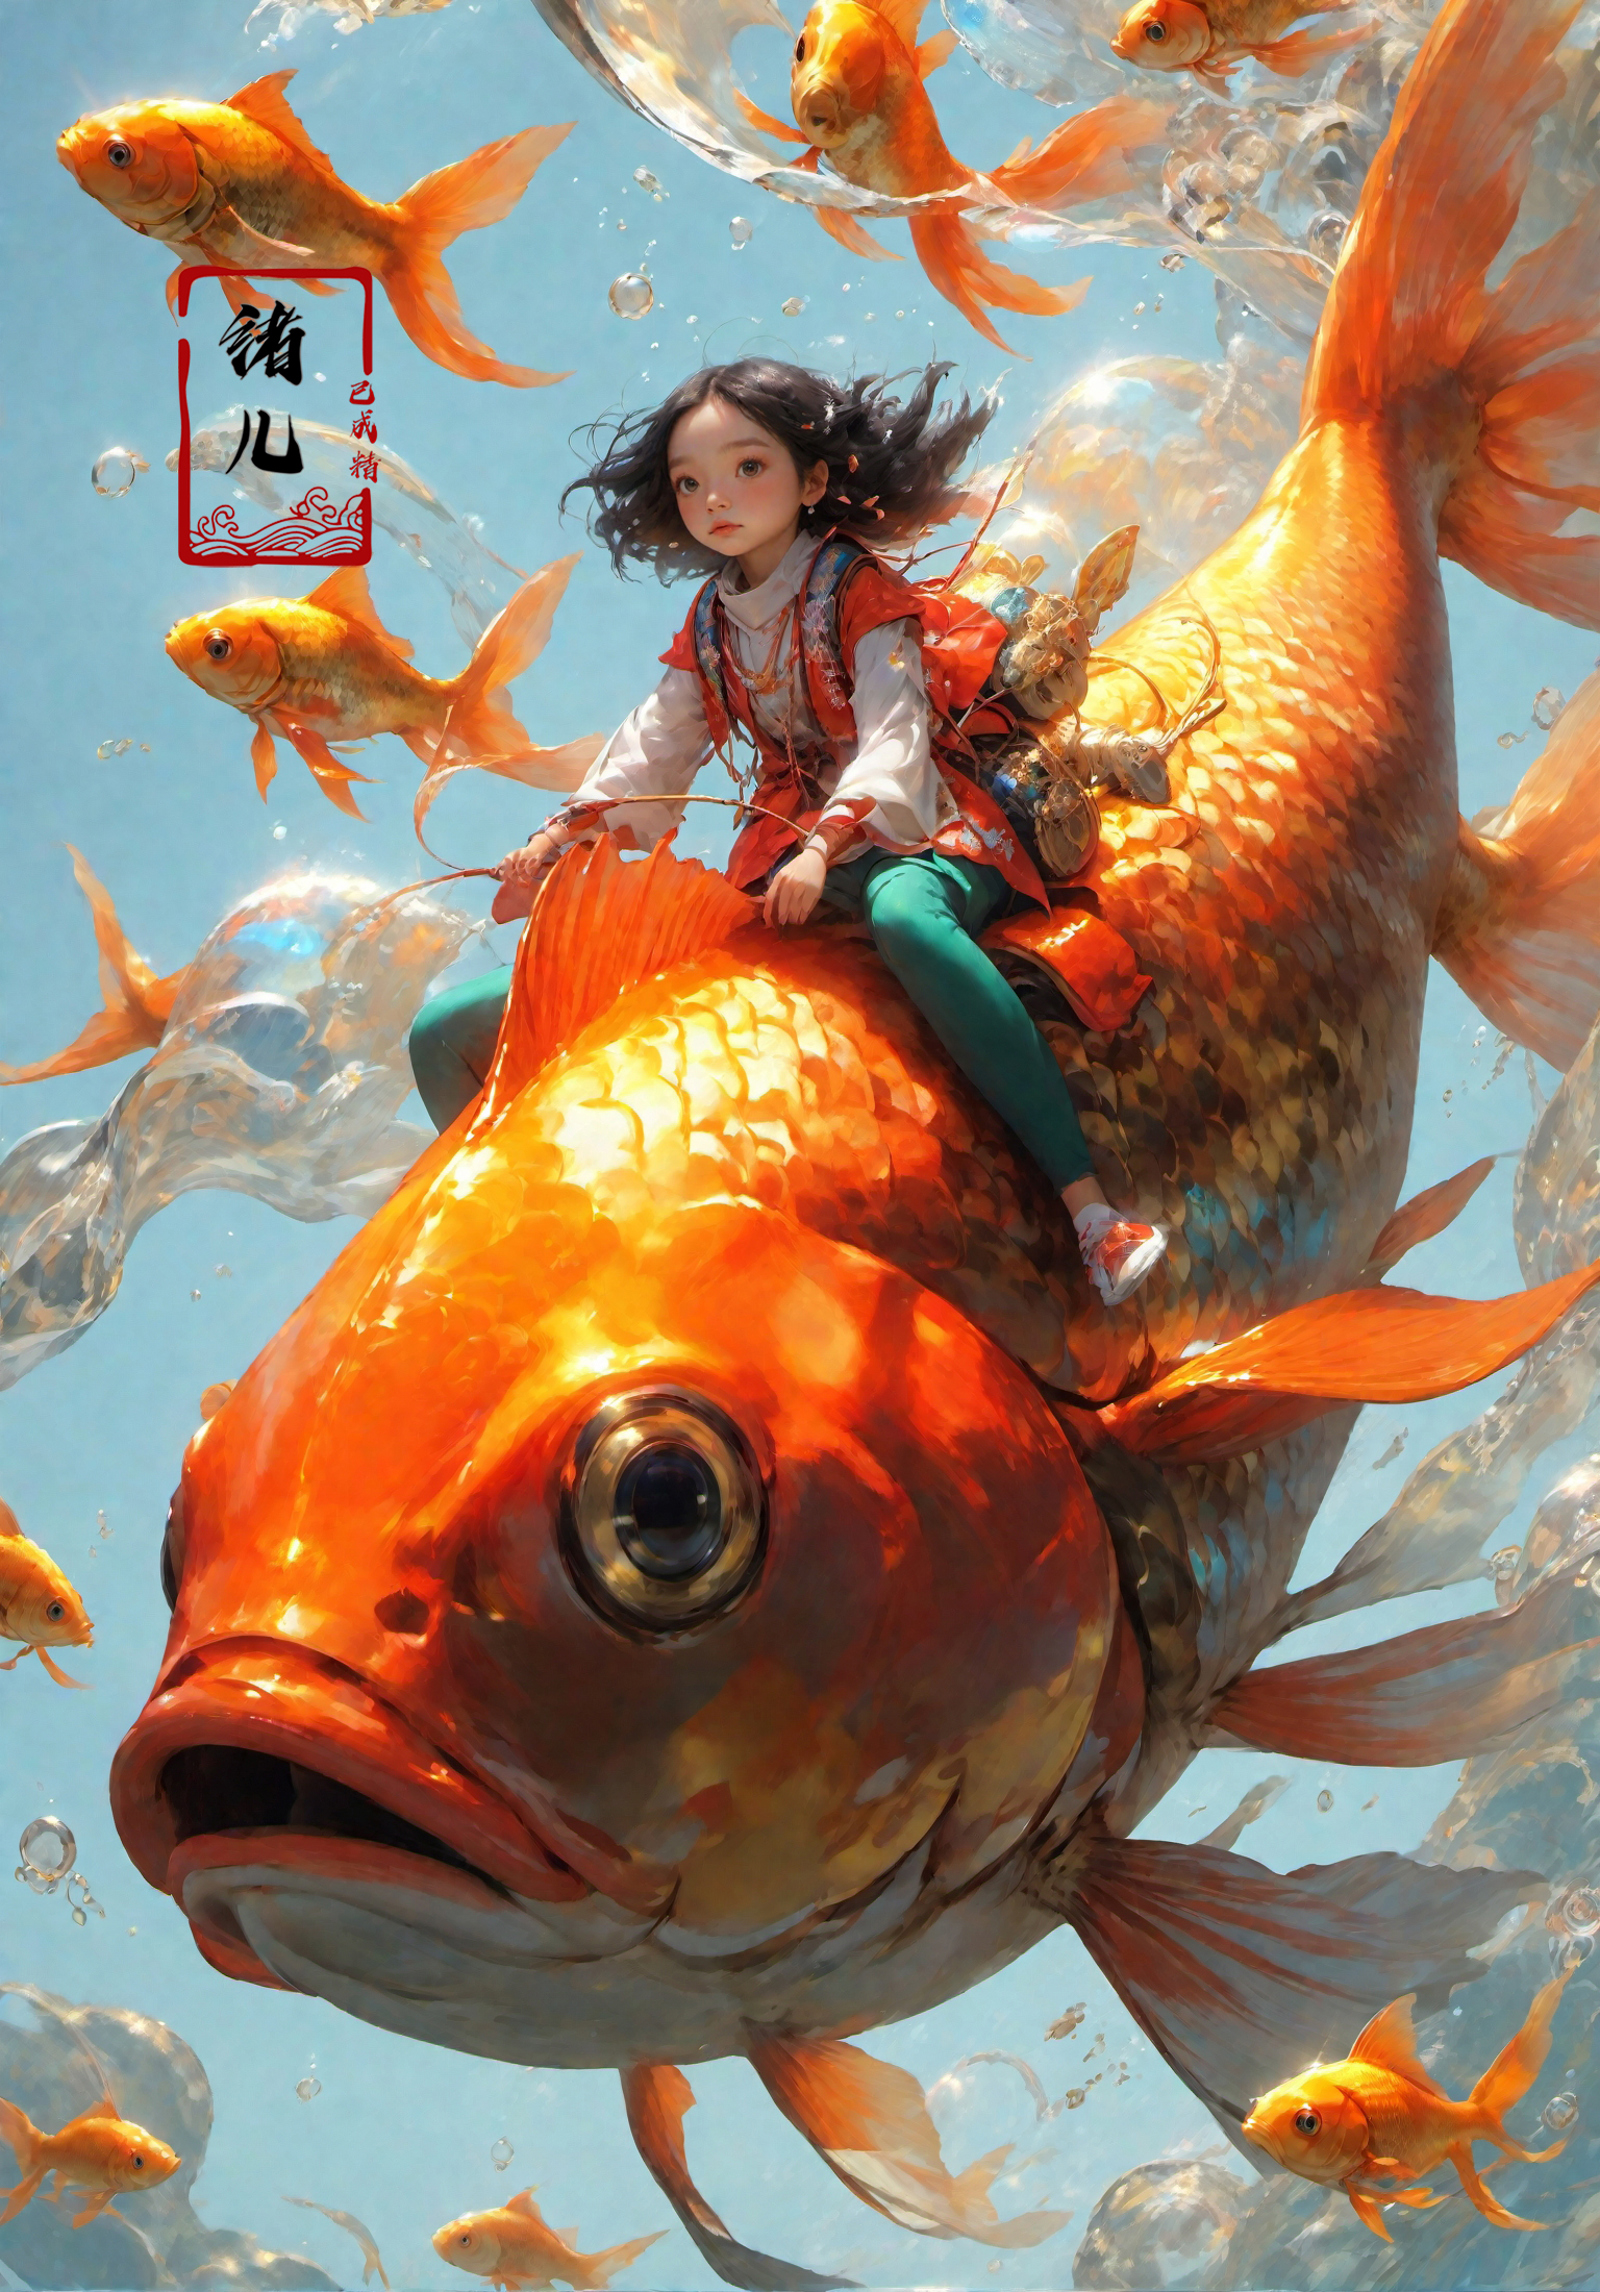 A young girl riding a fish in a painting.